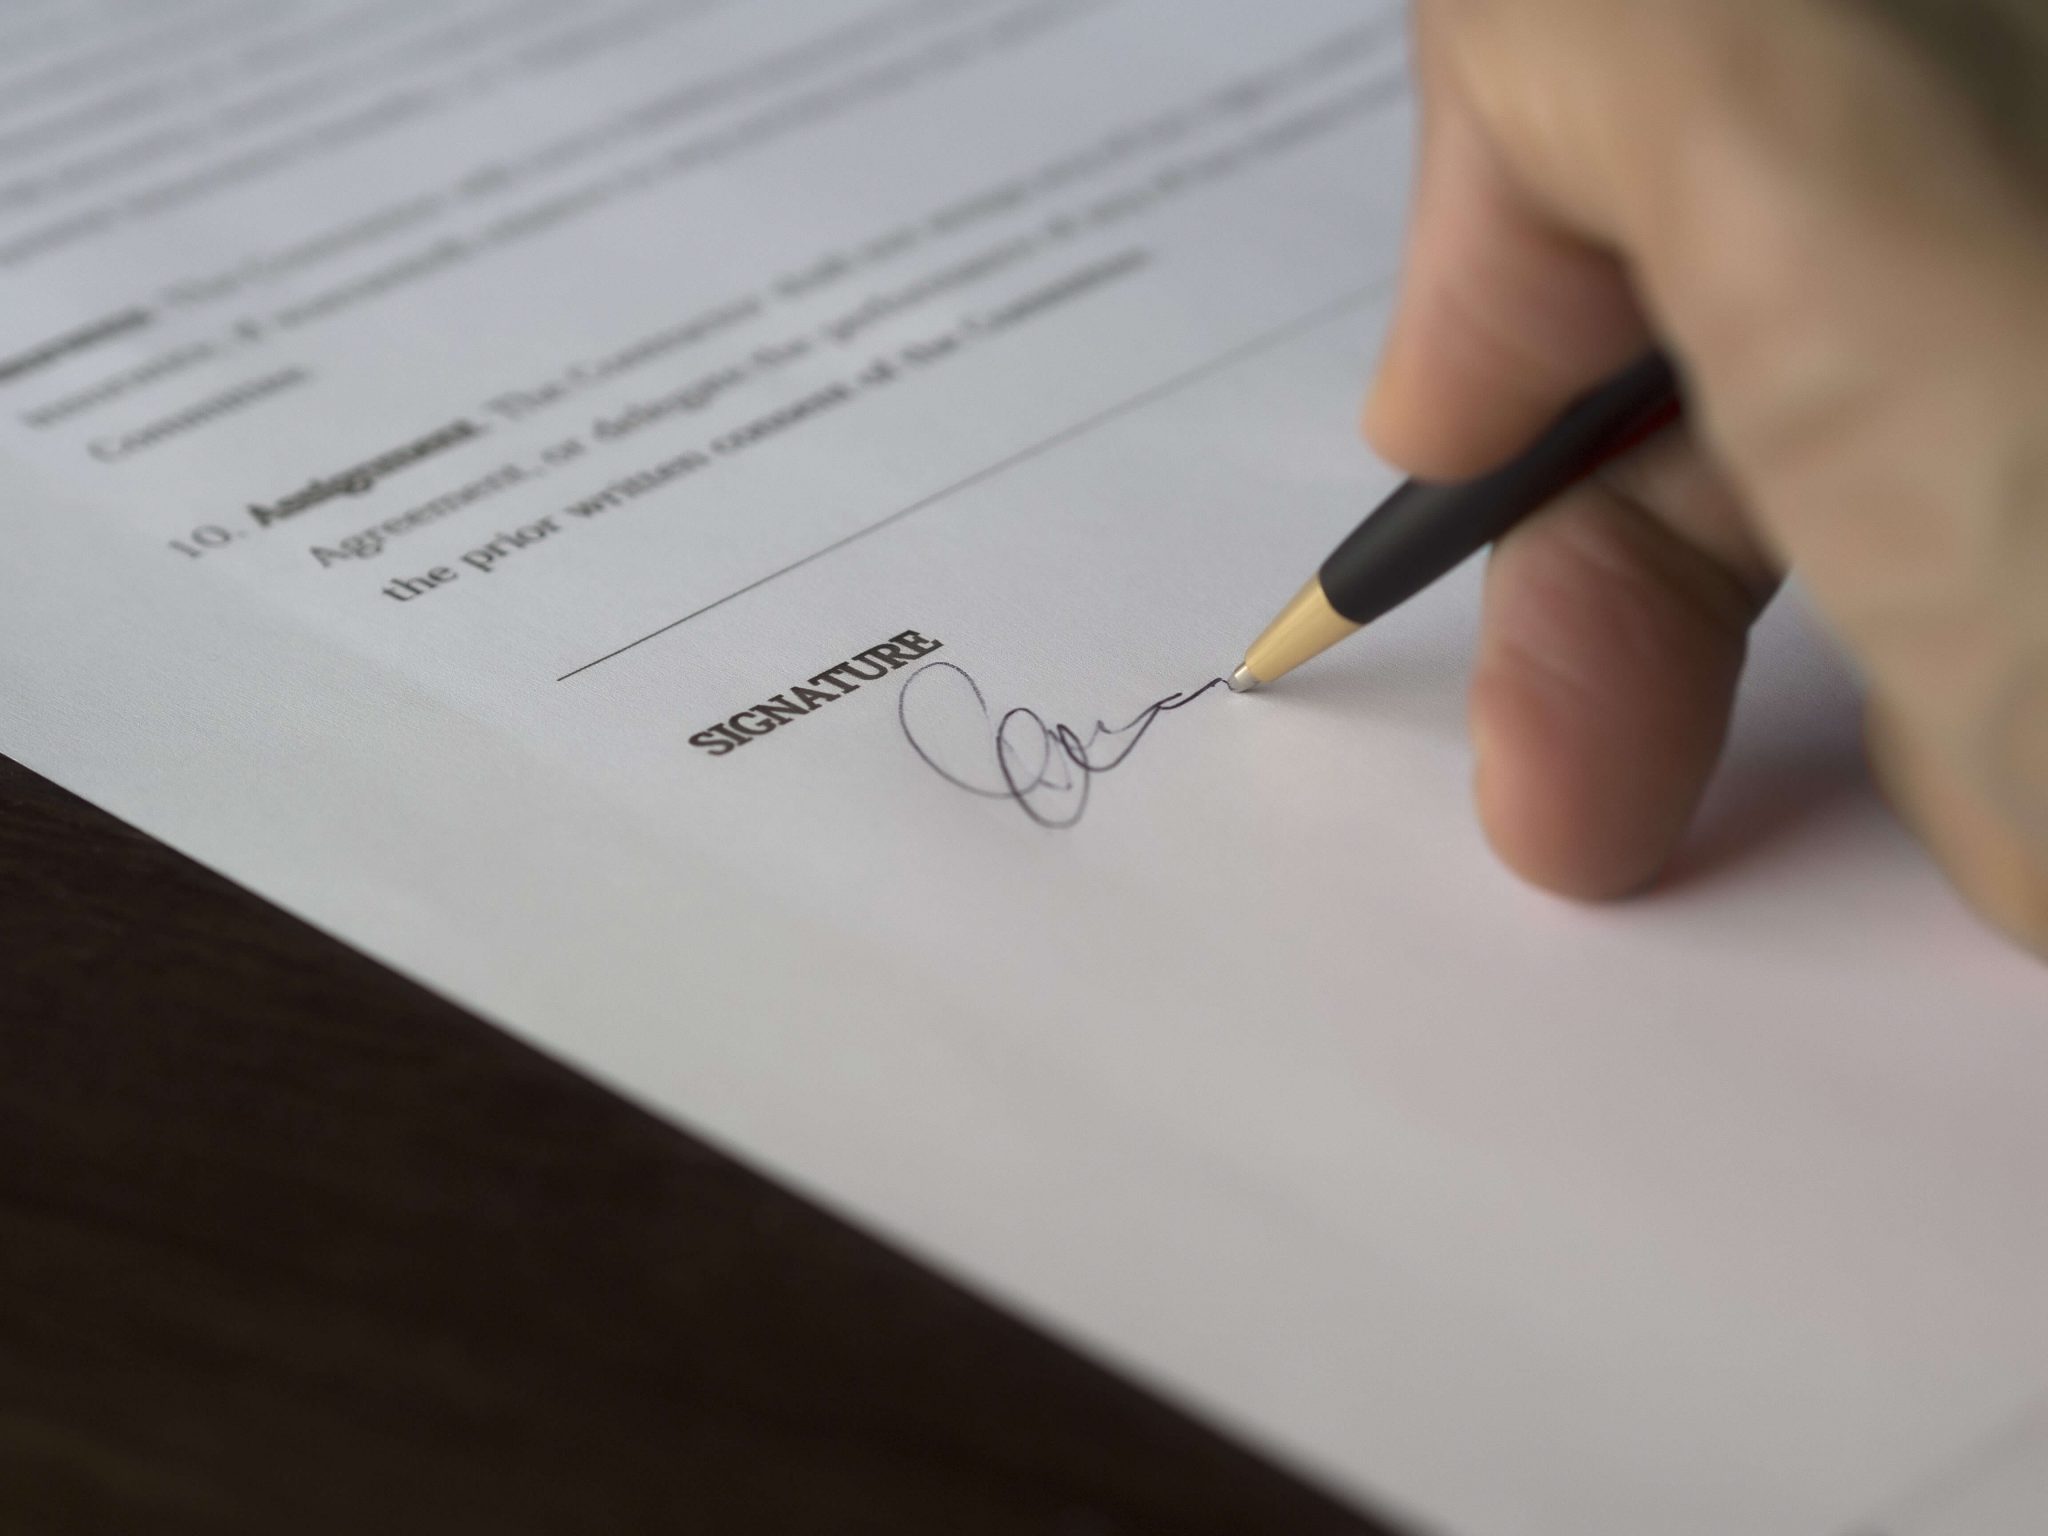 Signing a written contract with pen